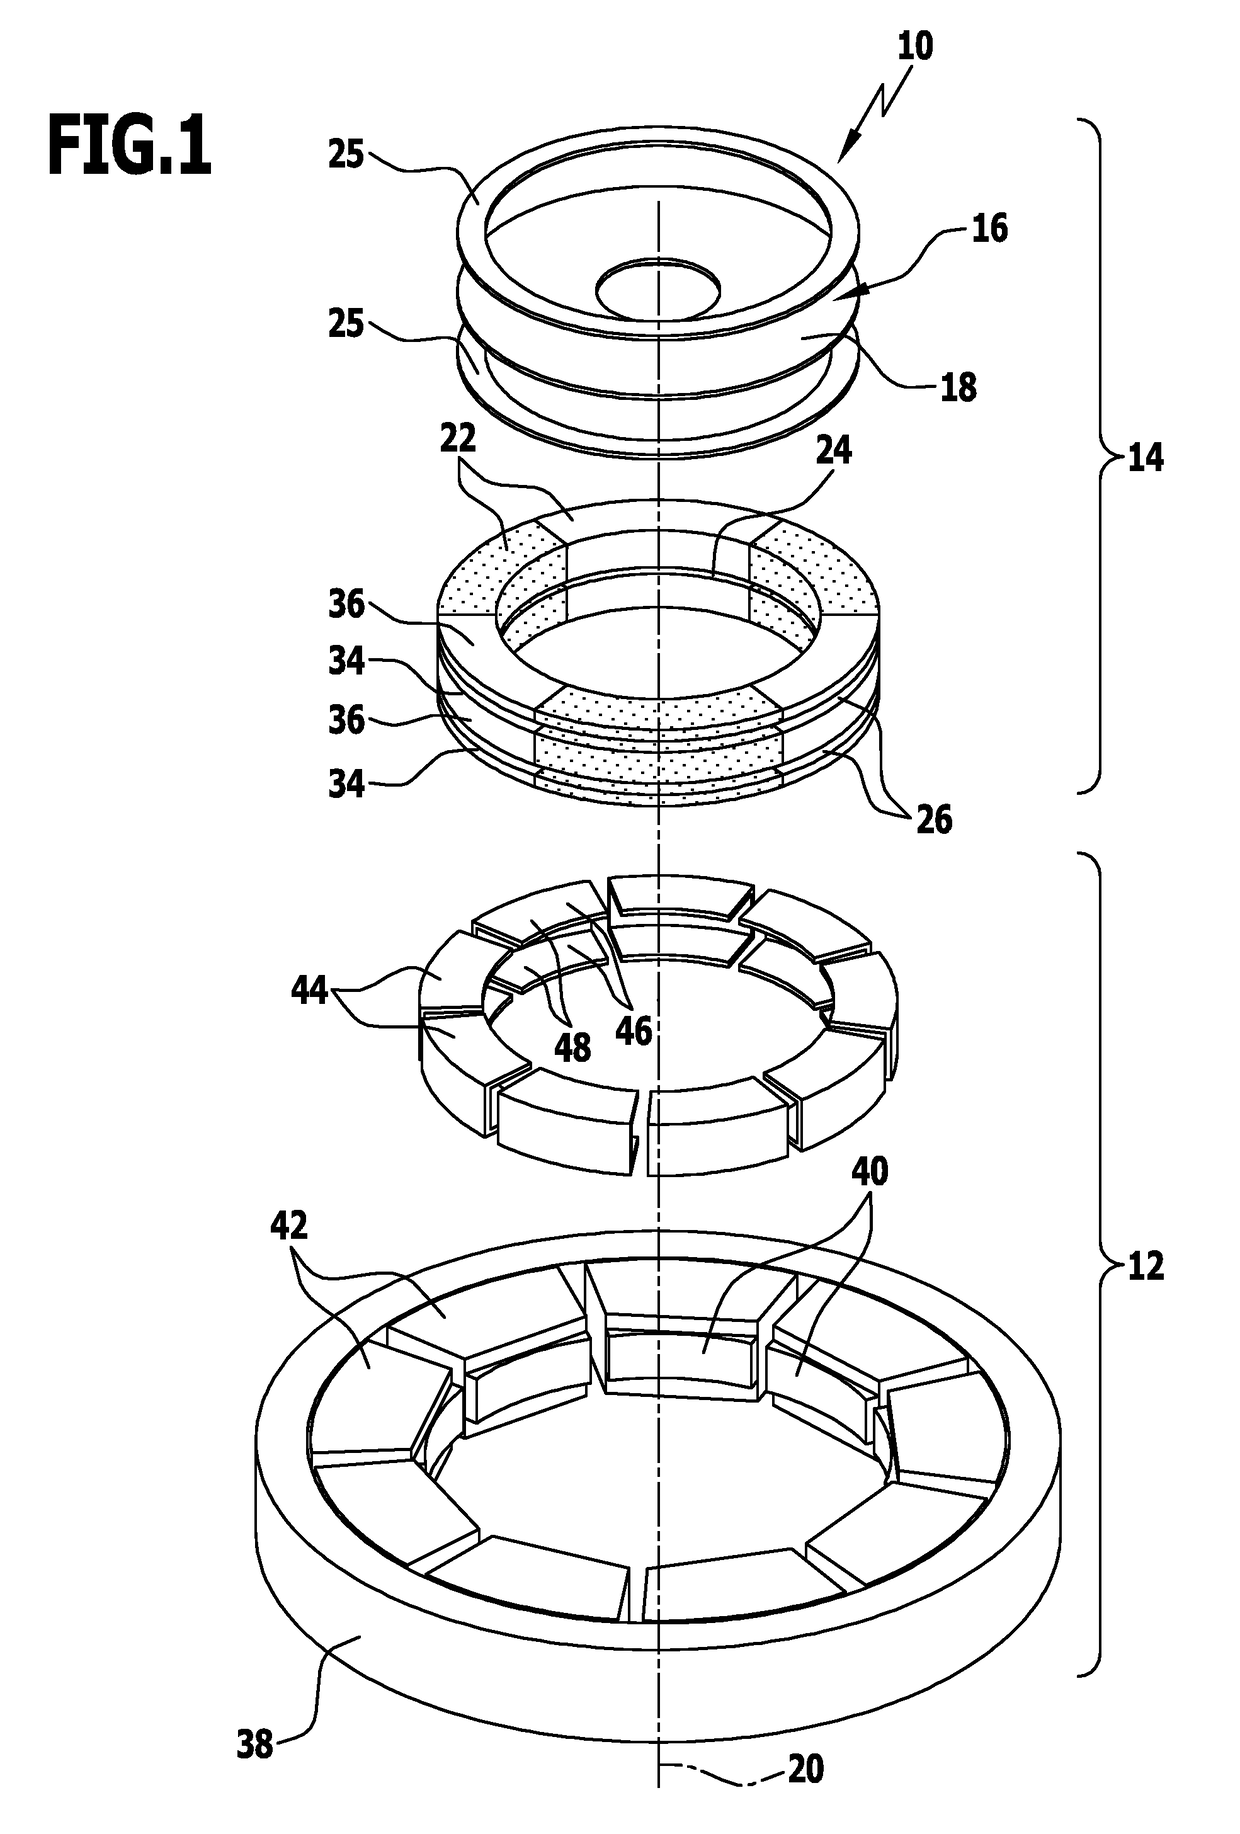 Stator-rotor device for an electrical machine